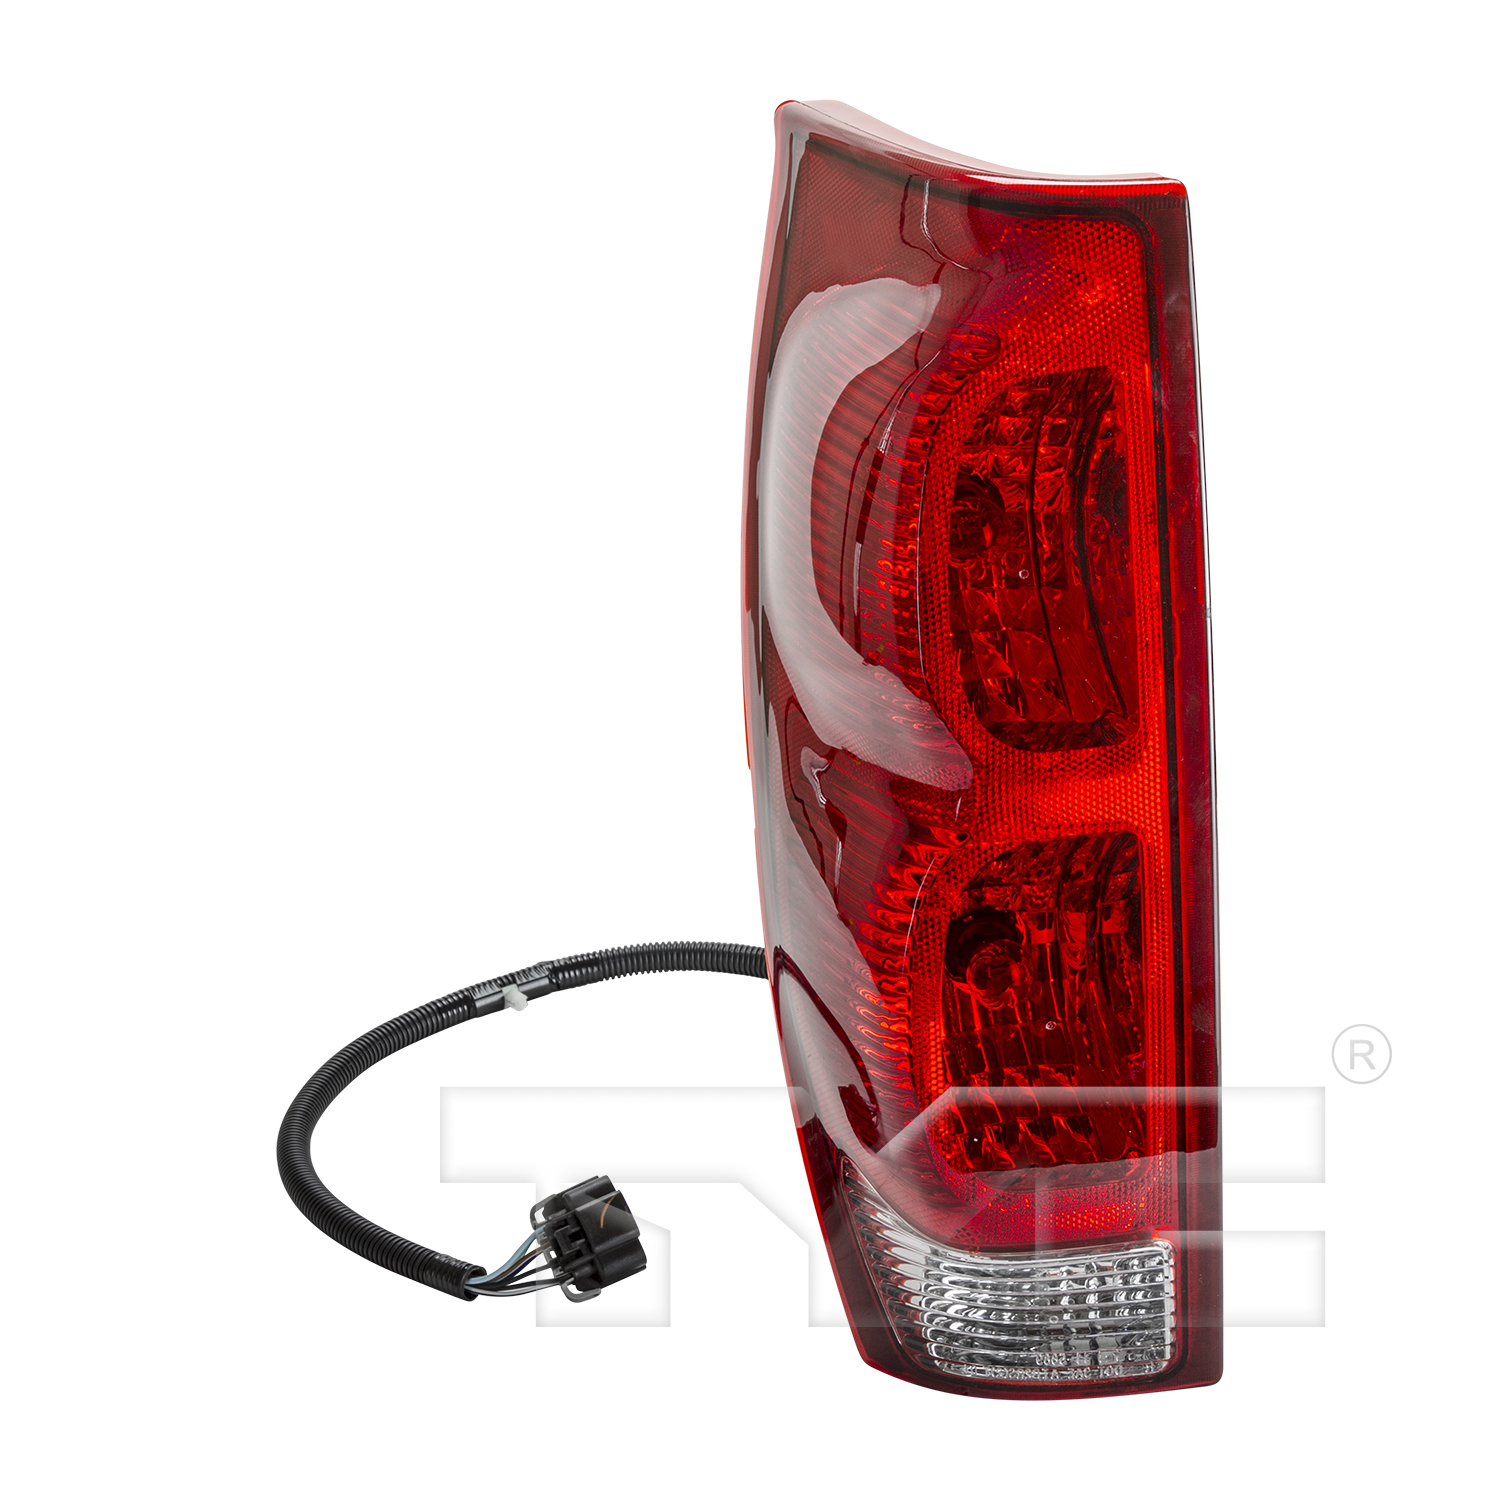 Aftermarket TAILLIGHTS for CHEVROLET - AVALANCHE 2500, AVALANCHE 2500,02-06,LT Taillamp assy